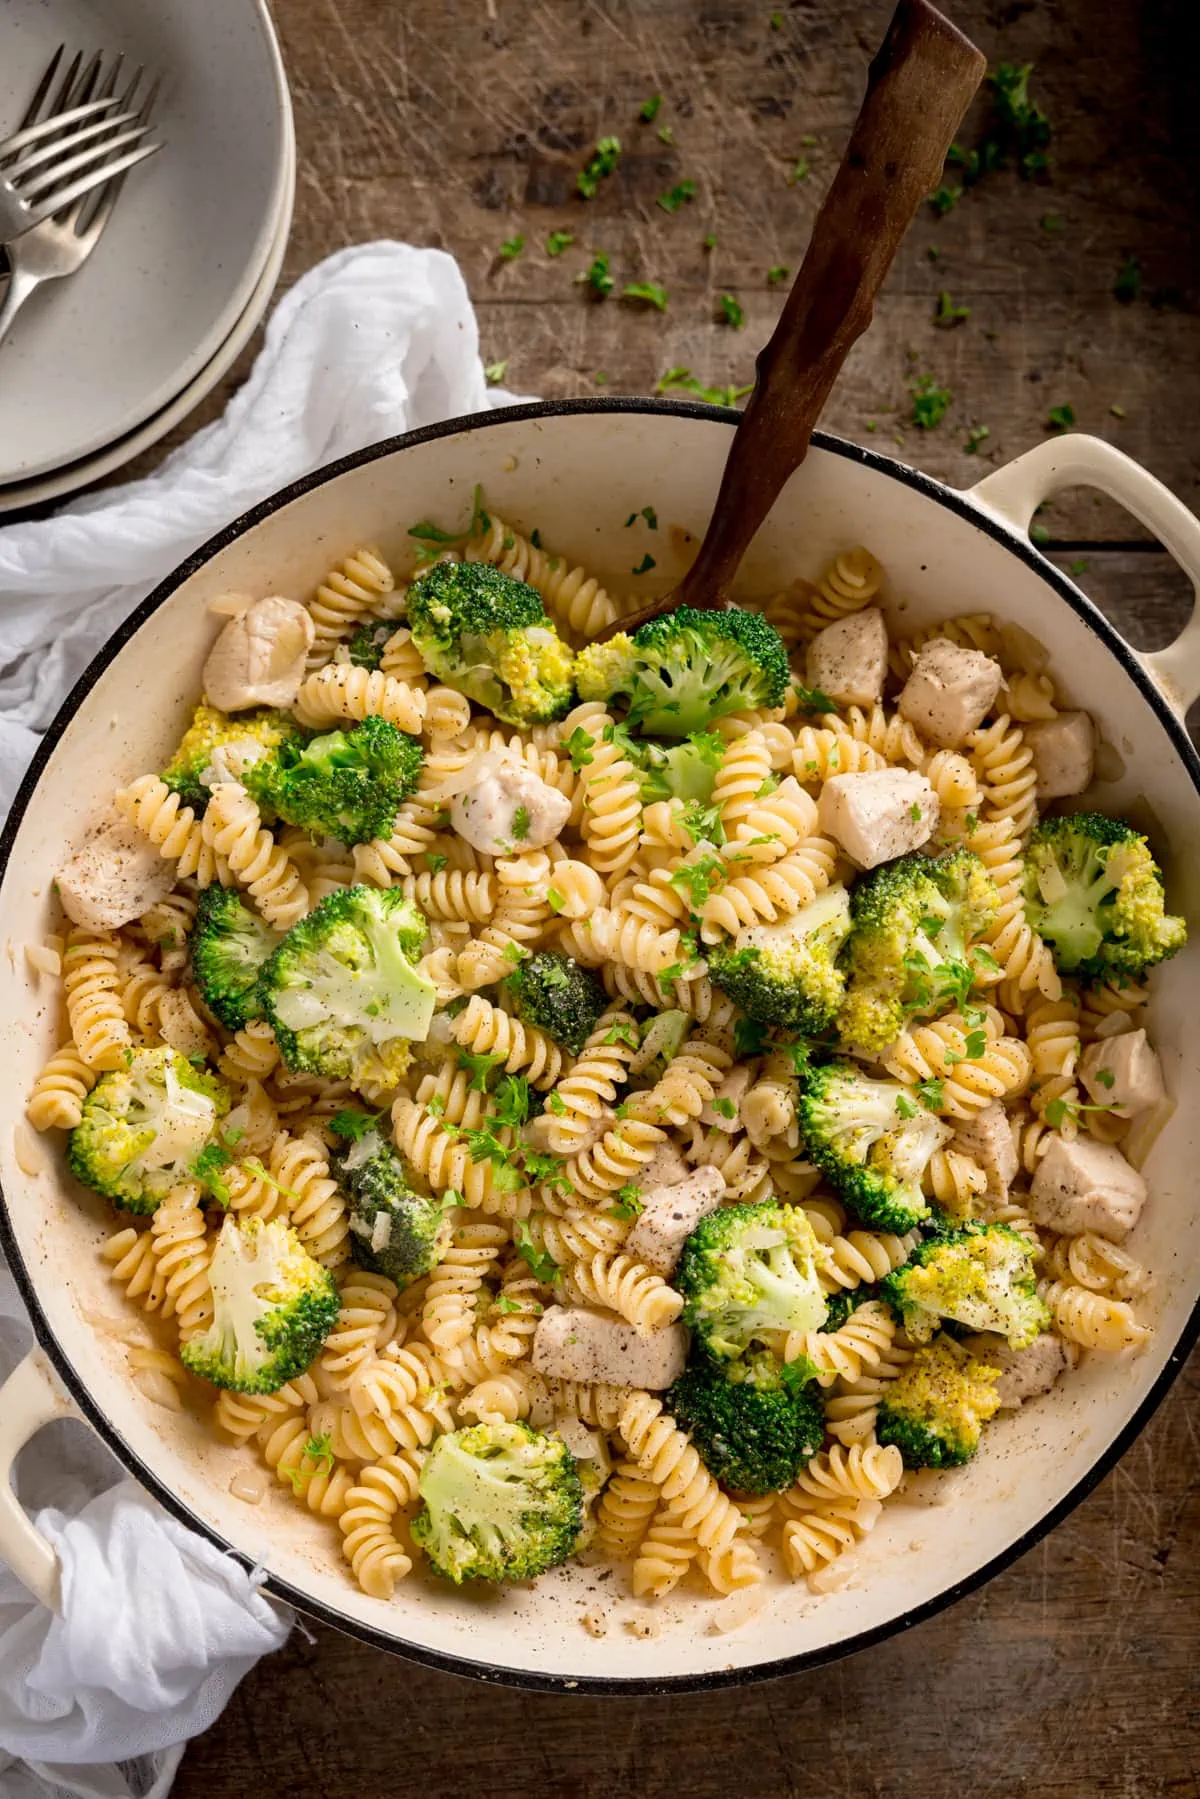 https://www.kitchensanctuary.com/wp-content/uploads/2016/10/Chicken-and-Broccoli-one-pot-Pasta-tall-FS.webp